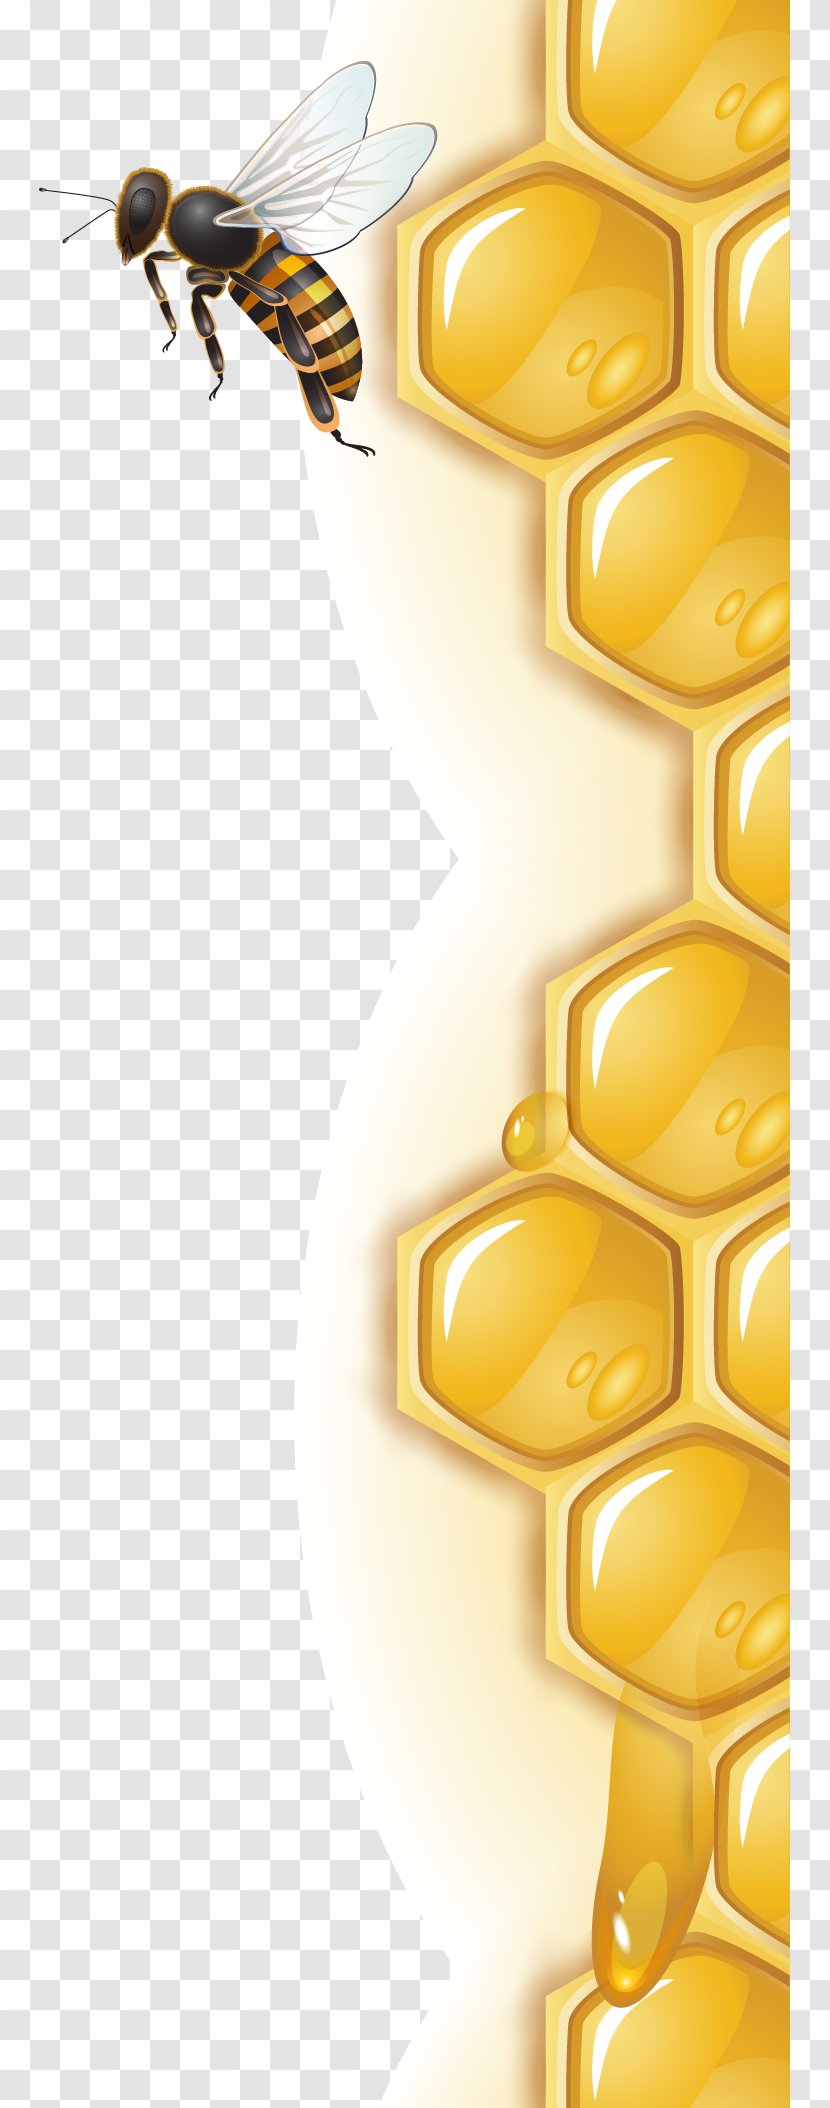 Honey Bee Honeycomb - Characteristics Of Common Wasps And Bees - Lace Vector. Transparent PNG